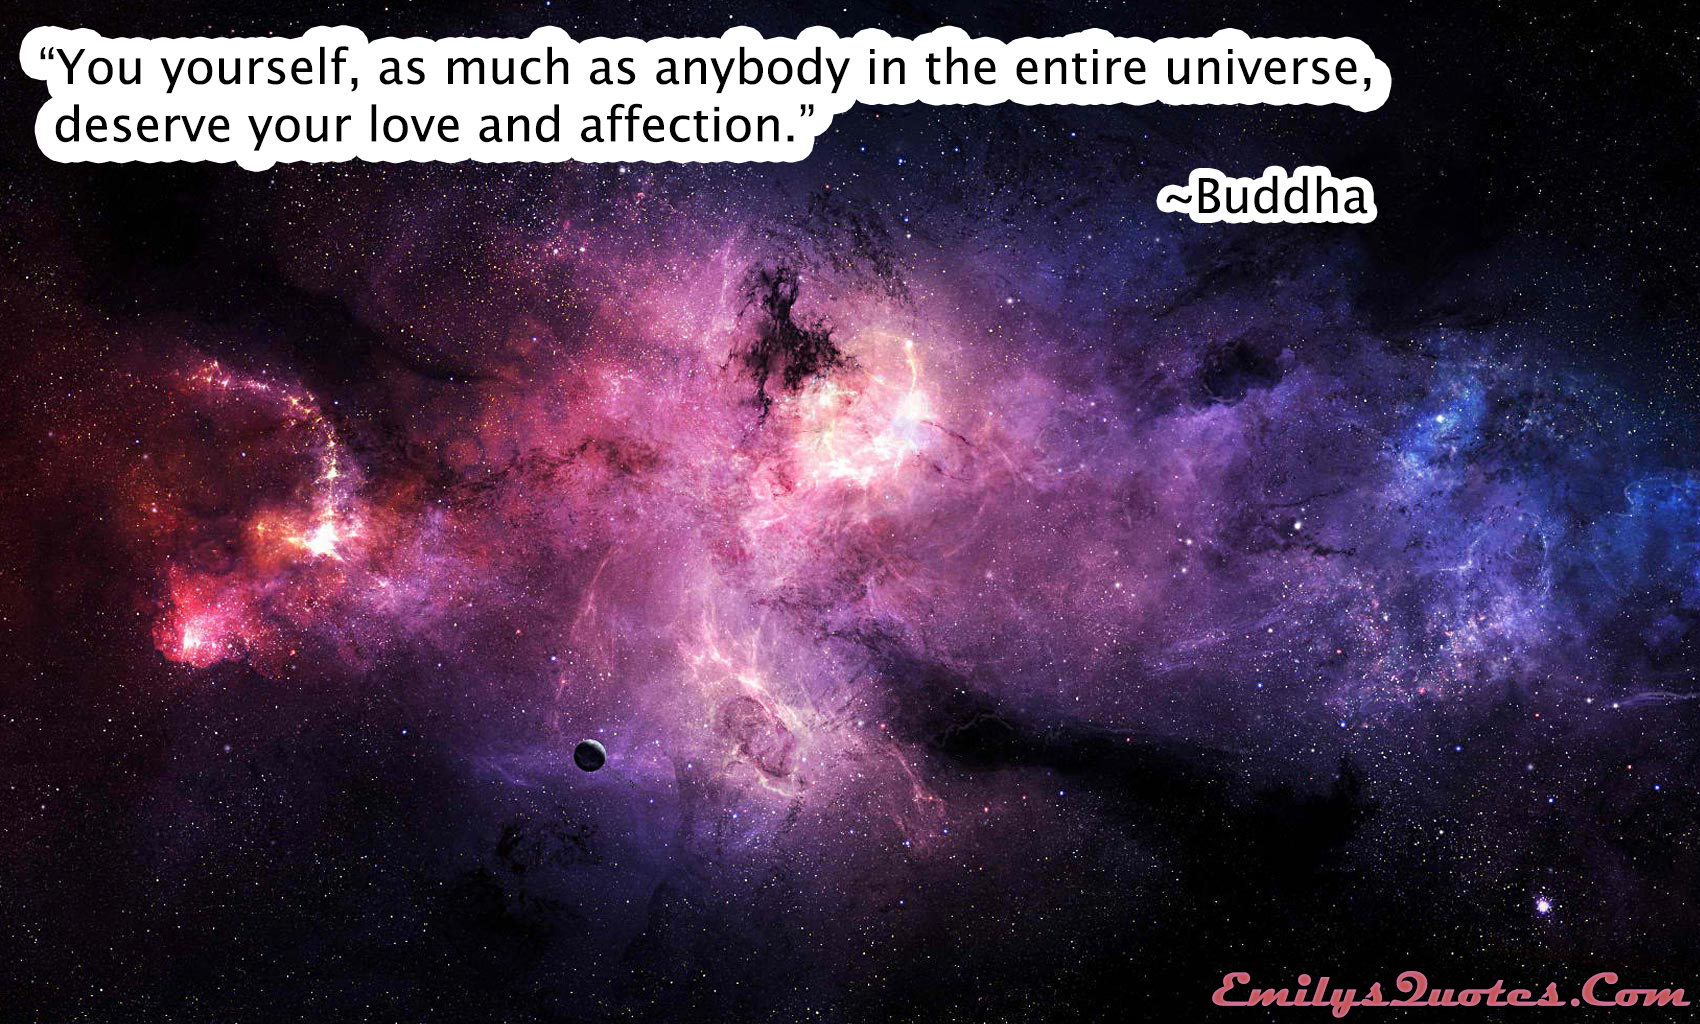 You yourself, as much as anybody in the entire universe